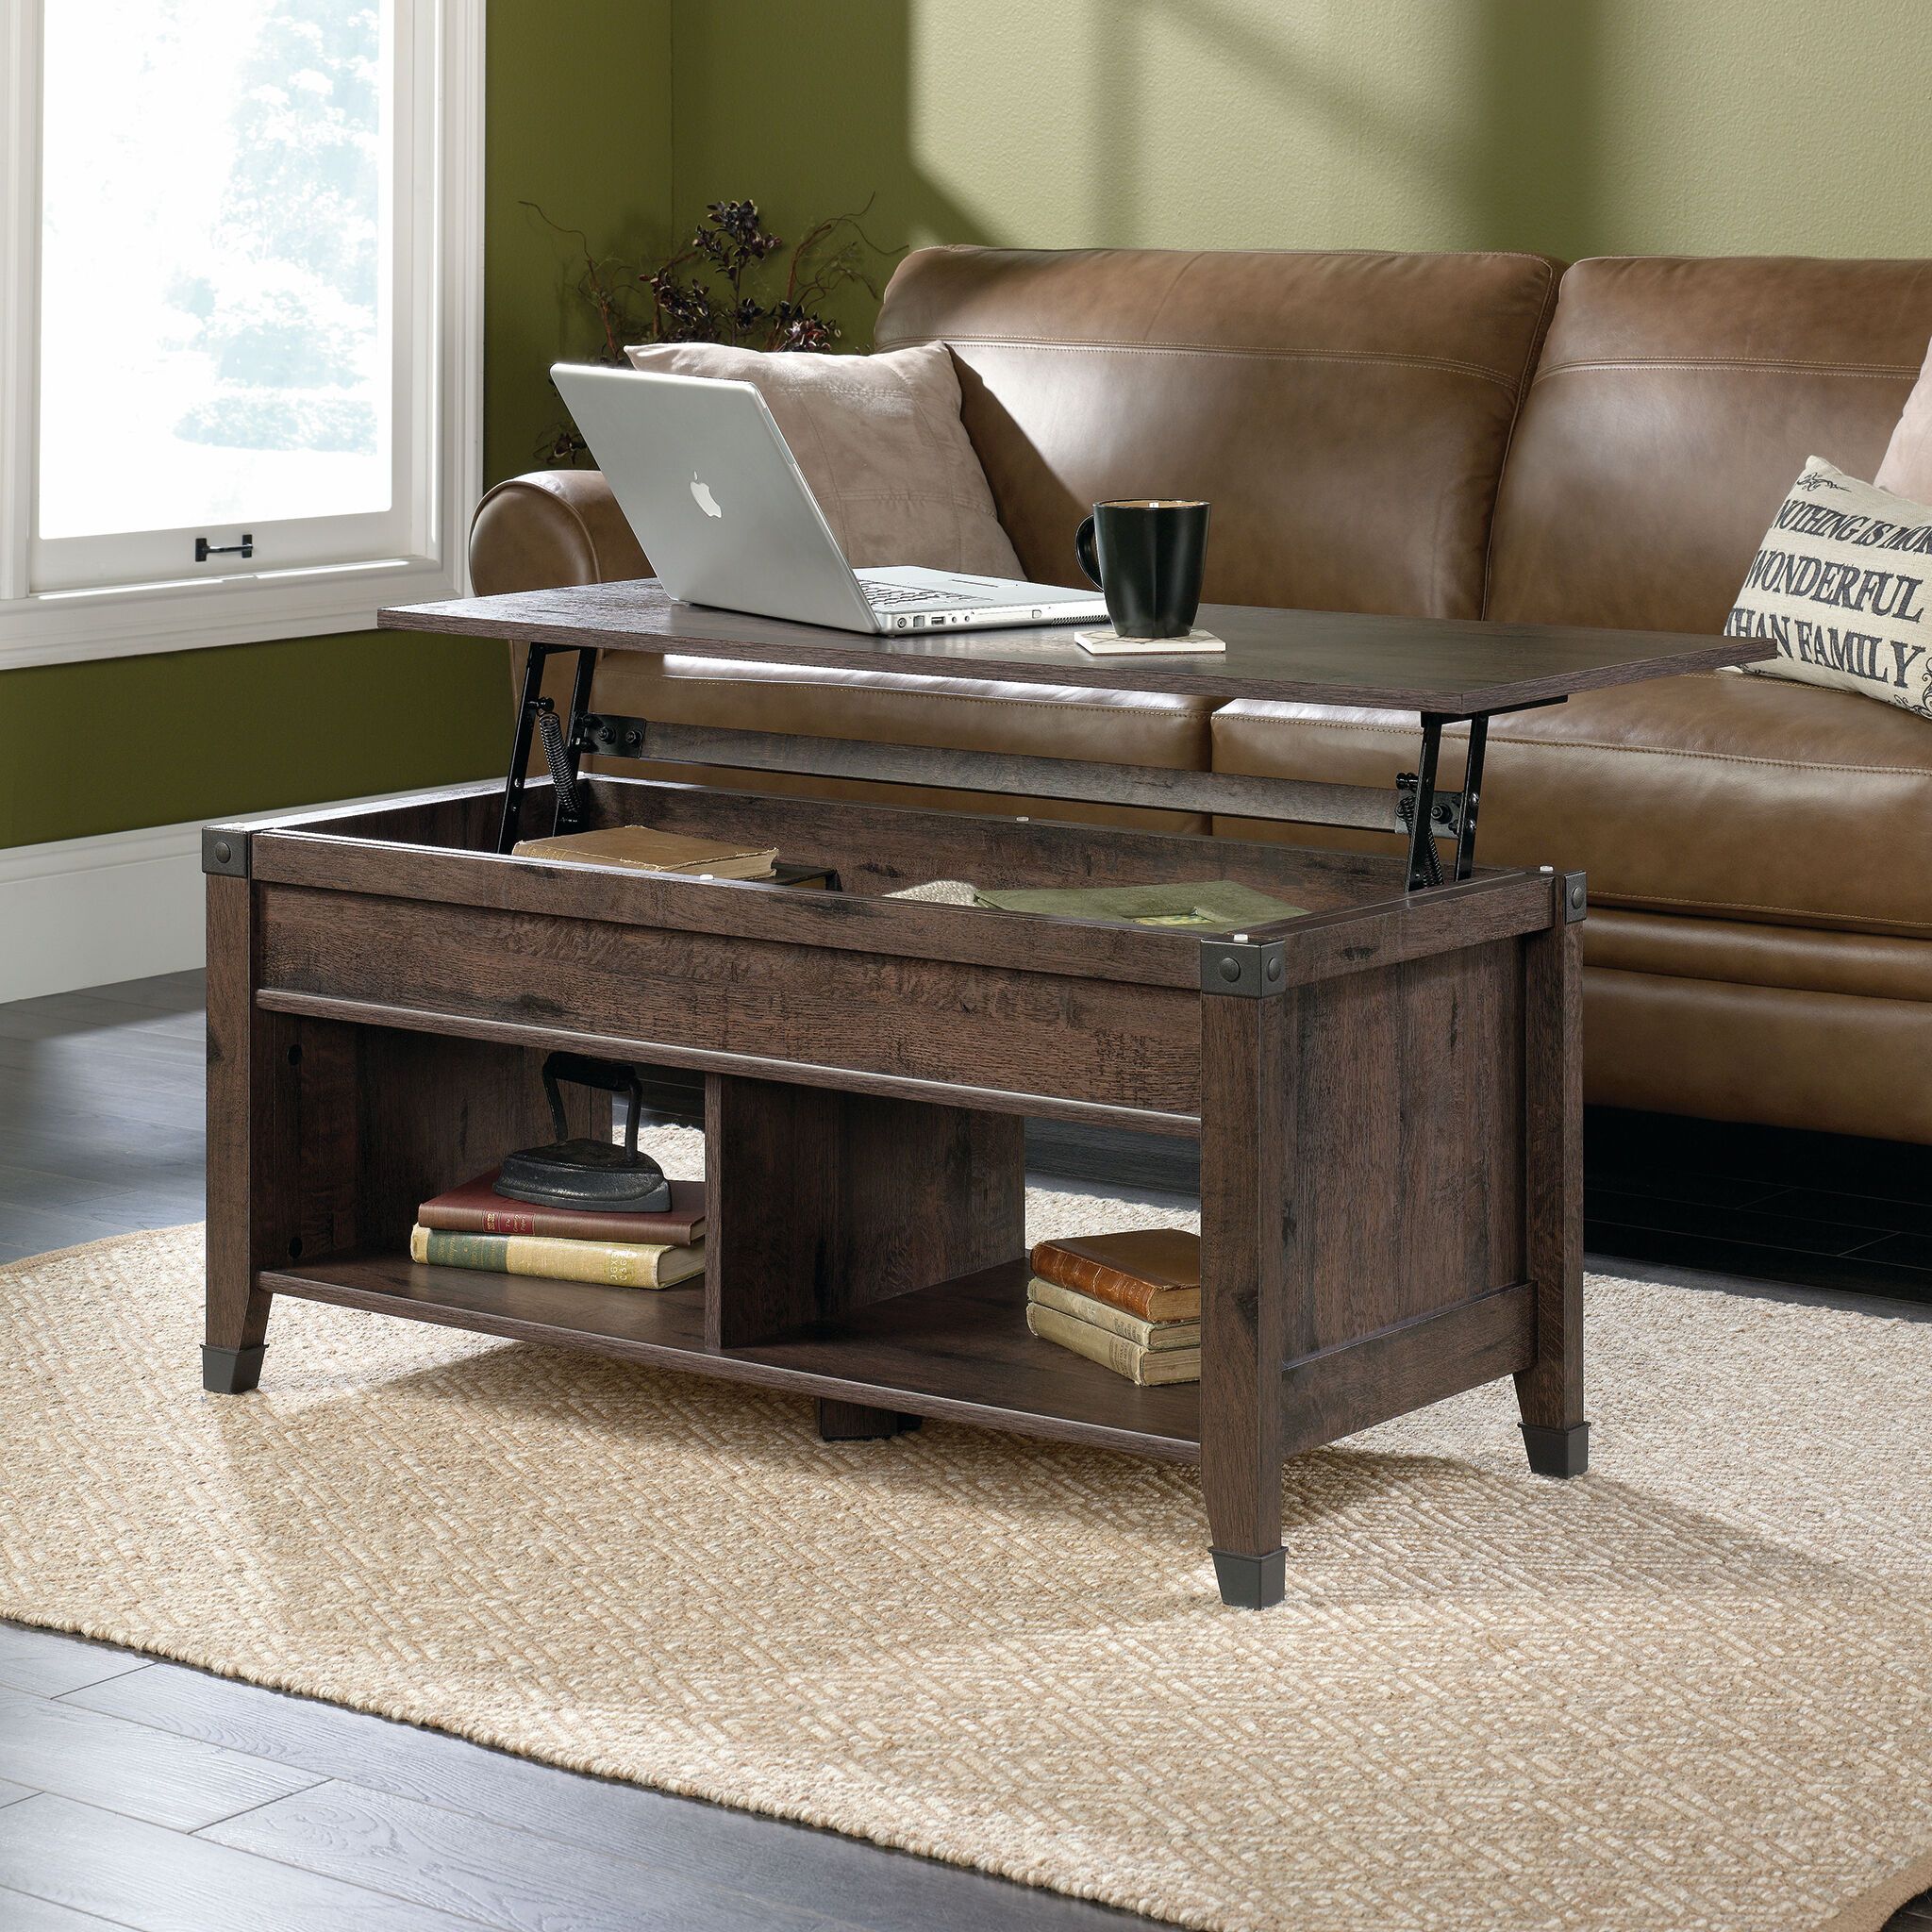 Rectangular Lift Top Contemporary Coffee Table In Coffee Oak | Mathis Pertaining To Modern Wooden Lift Top Tables (View 4 of 20)